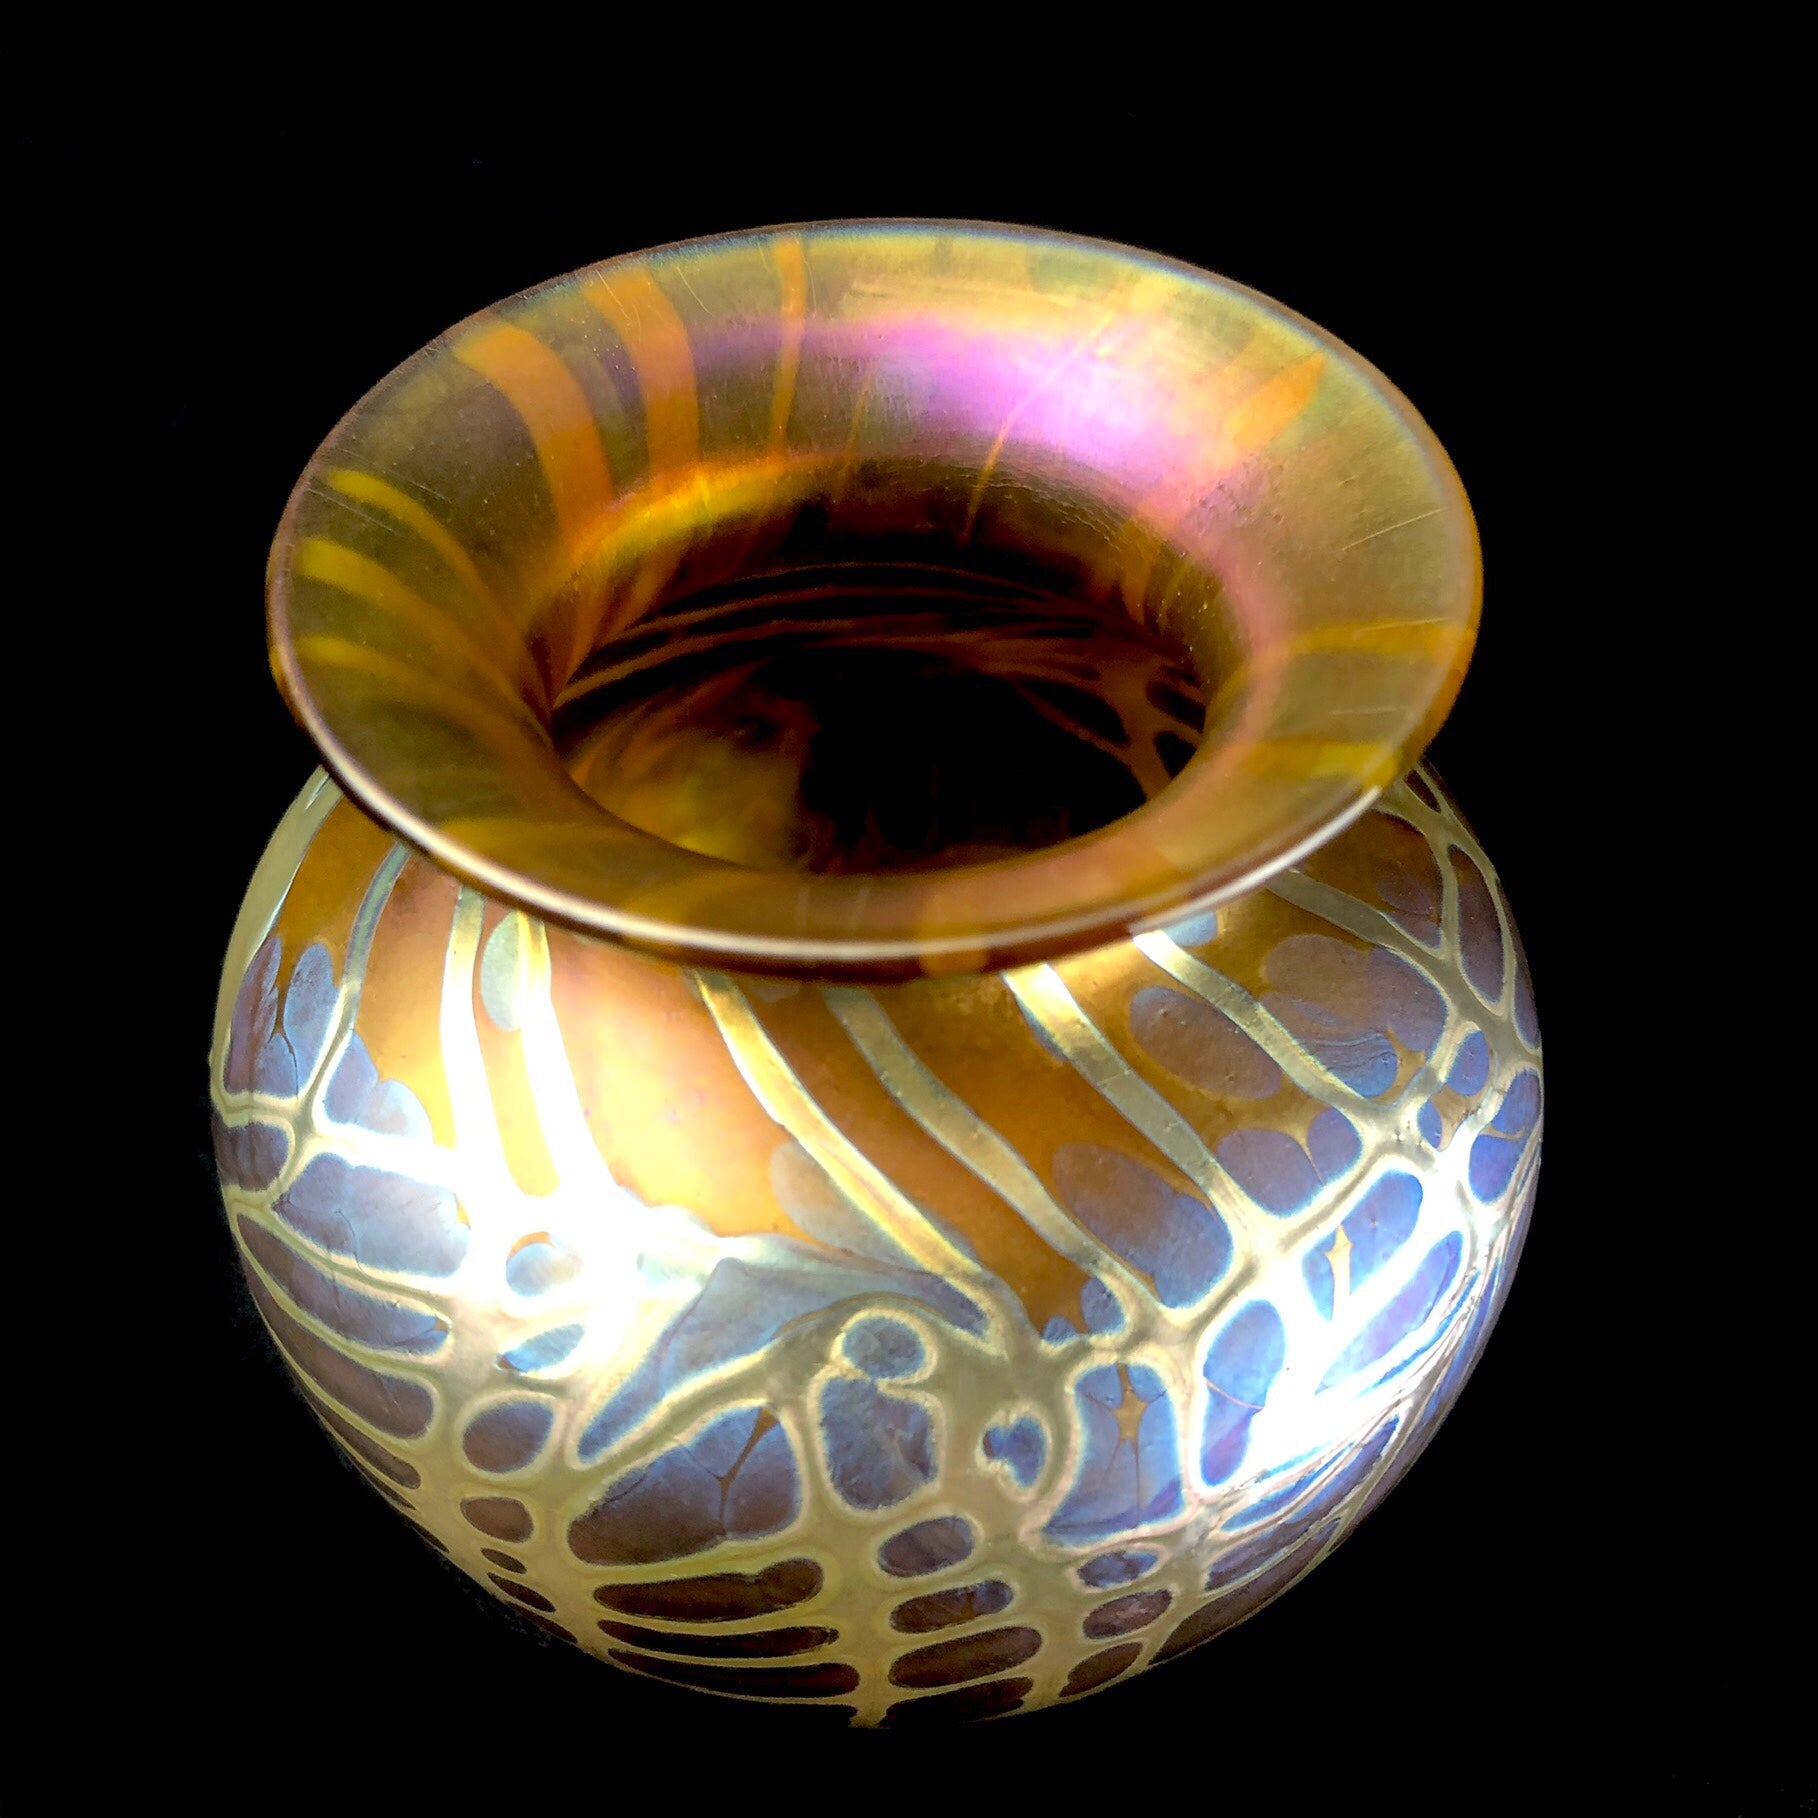 Top view of Amber Starry Night Vase